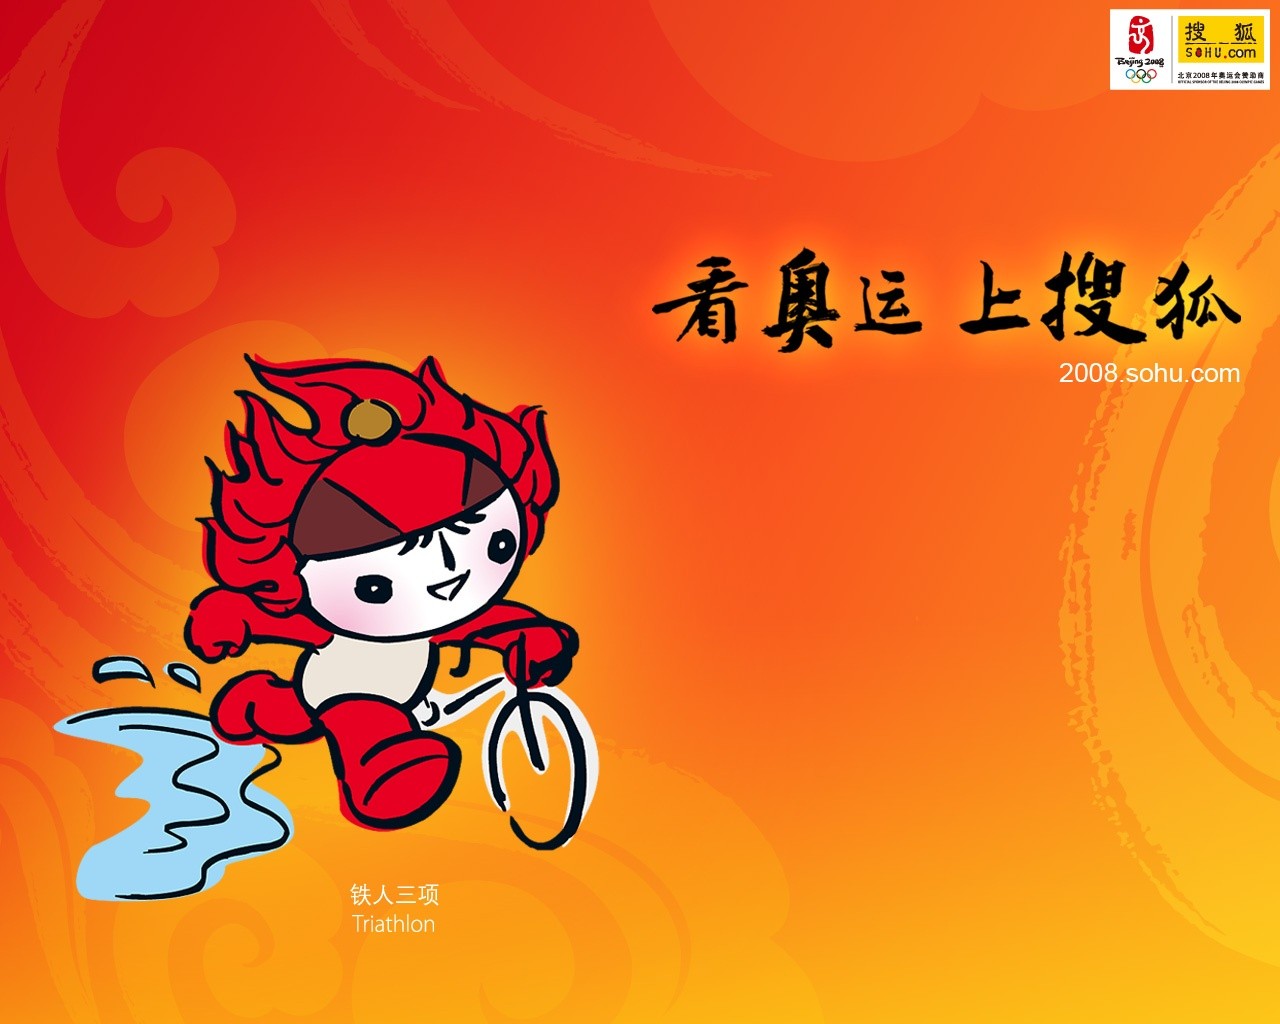 08 Olympic Games Fuwa Wallpapers #31 - 1280x1024